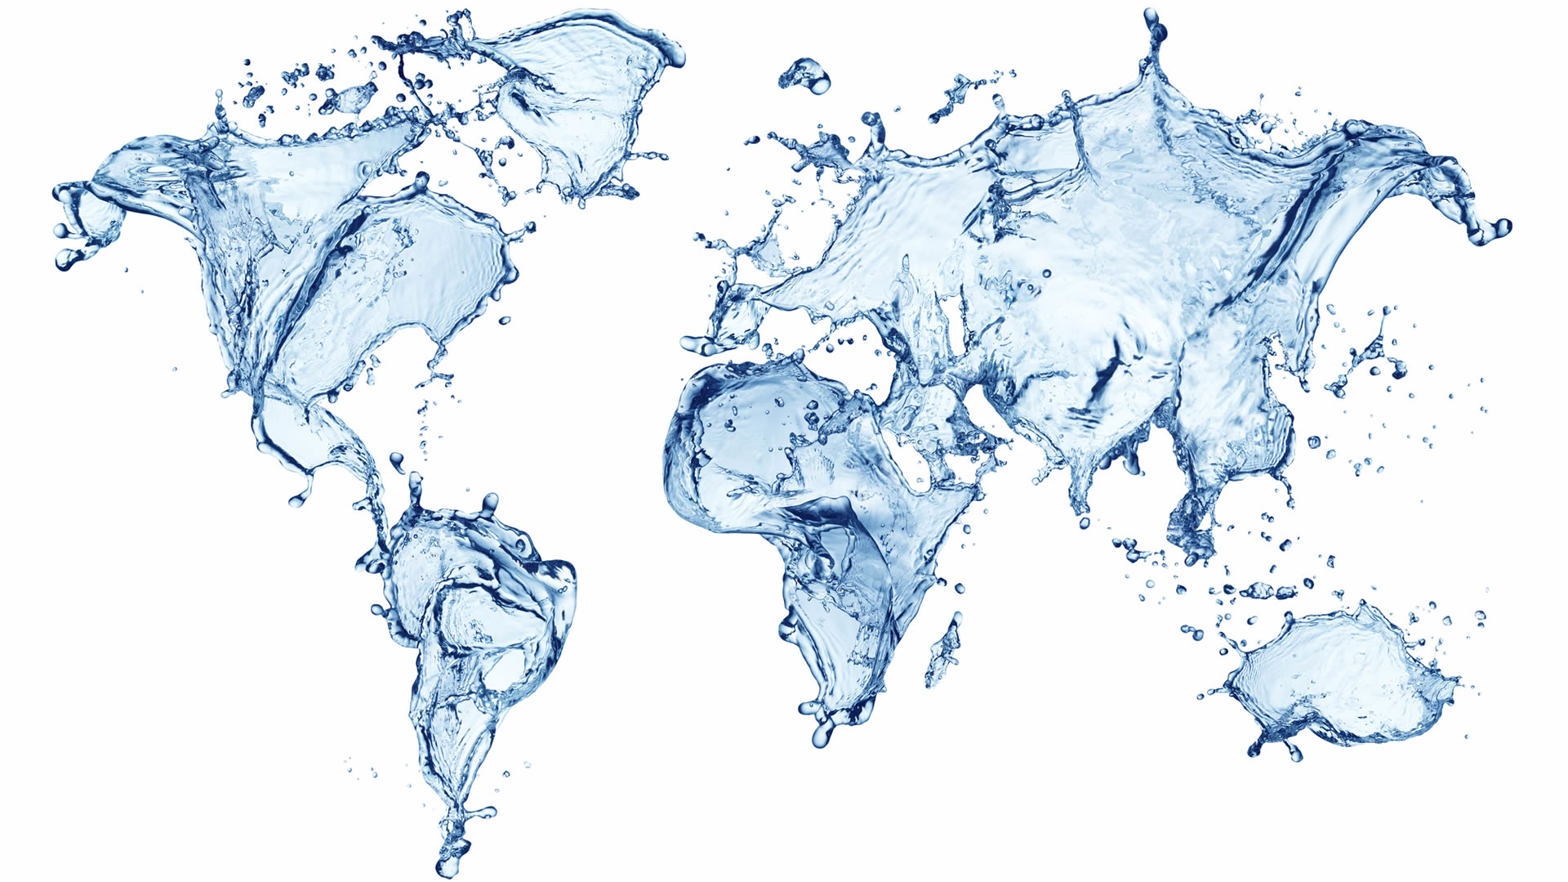 Stylized map of the world - white oceans and clear blue splashes of water for the land masses.